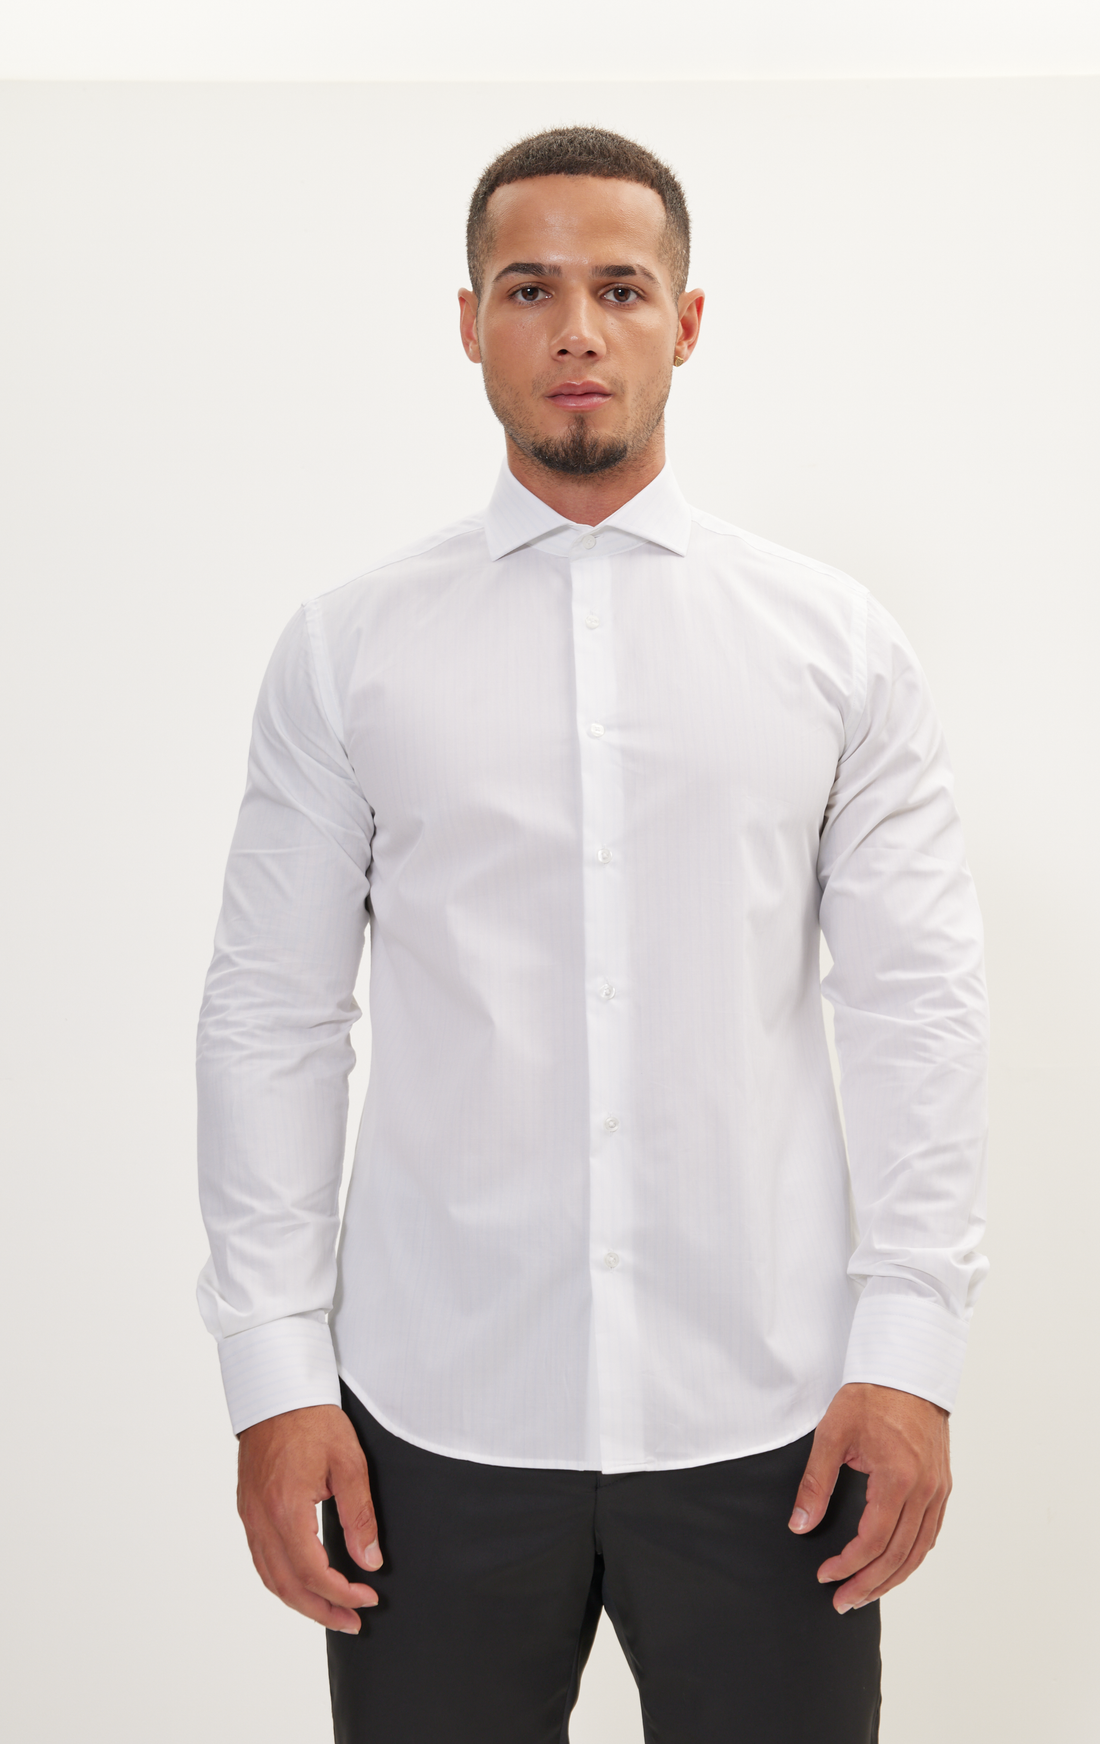 N° AN4903 PURE COTTON FRENCH PLACKET SPREAD COLLAR DRESS SHIRT - WHITE LIGHT BENGAL